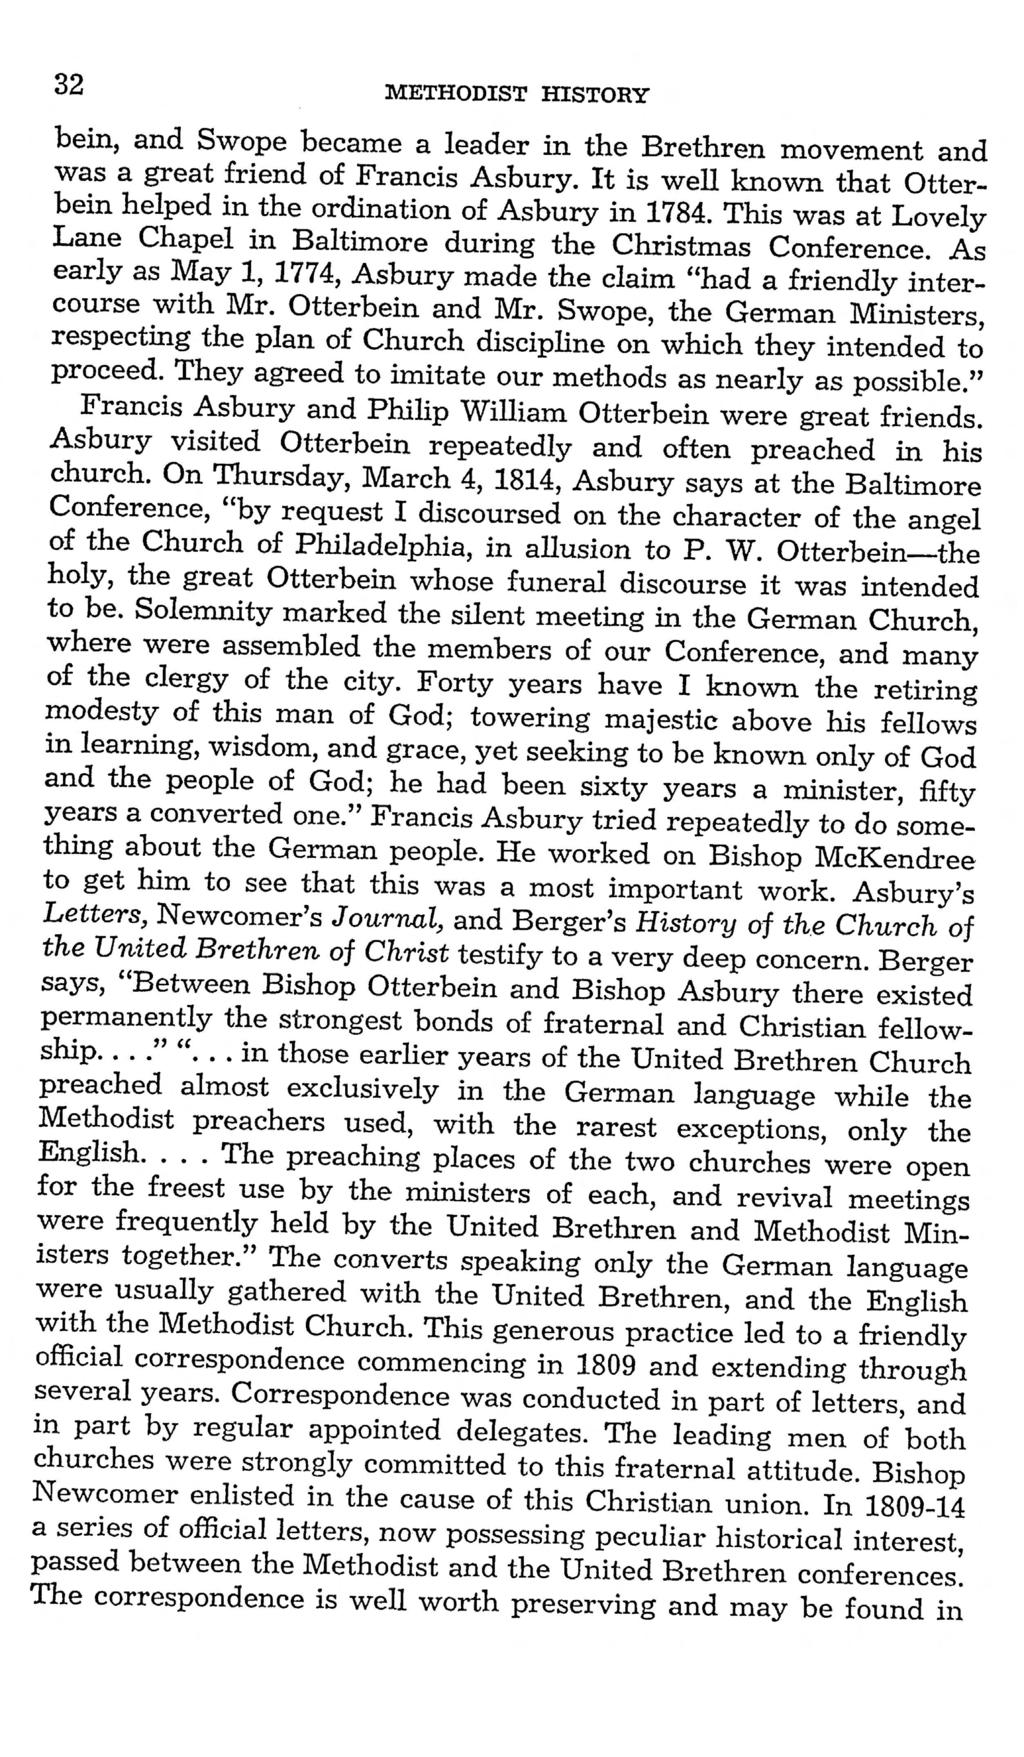 32 METHODIST HISTORY bein, and Swope became a leader in the Brethren movement and was a great friend of Francis Asbury. It is well known that Otterbein helped in the ordination of Asbury in 1784.